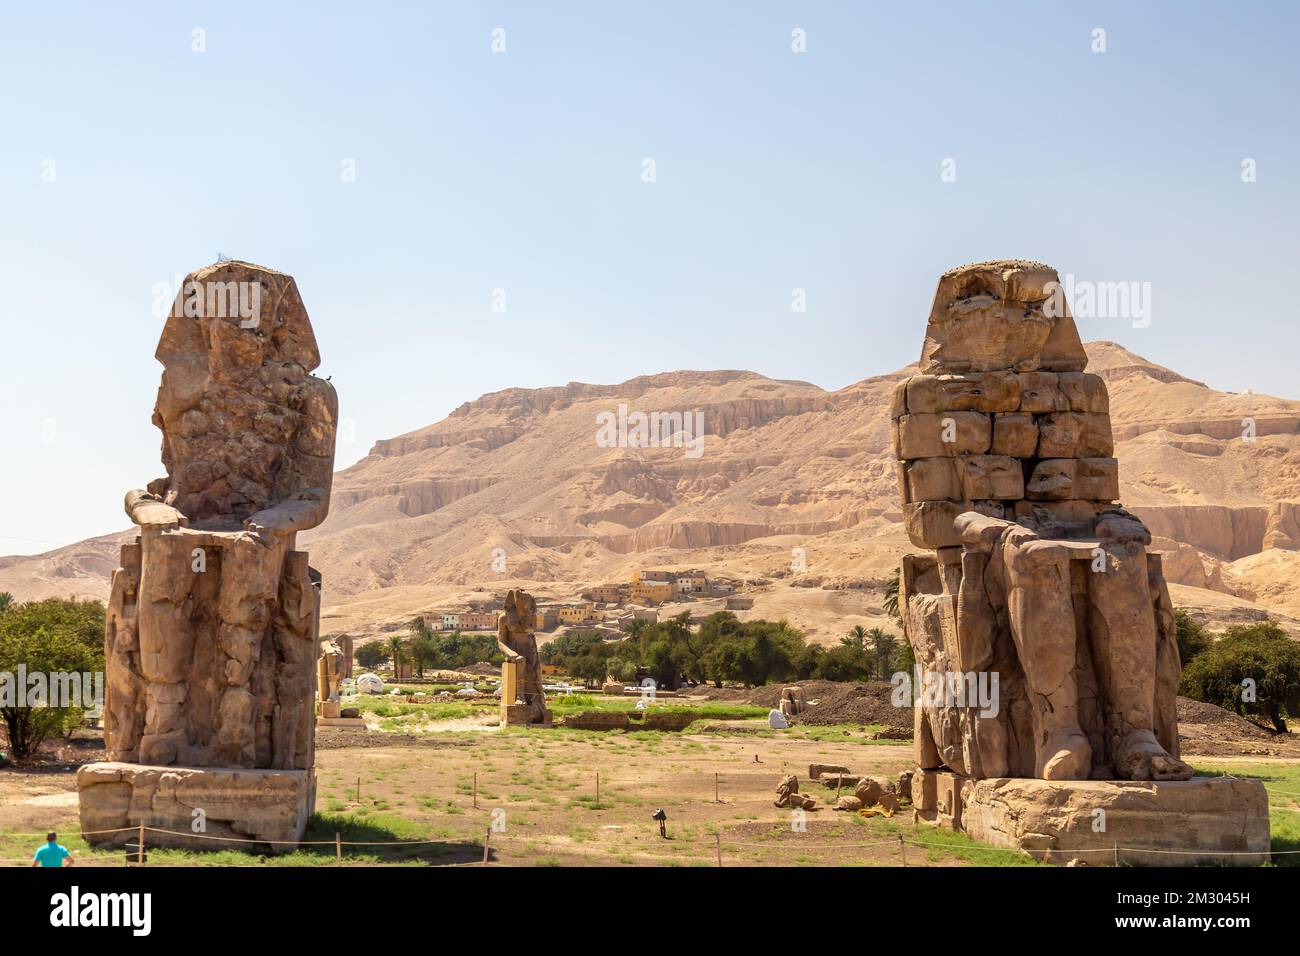 View of Colossi of Memnon, stone statues of Pharaoh Amenhotep III, in Theban Necropolis, located west of the River Nile from Luxor, Egypt Stock Photo